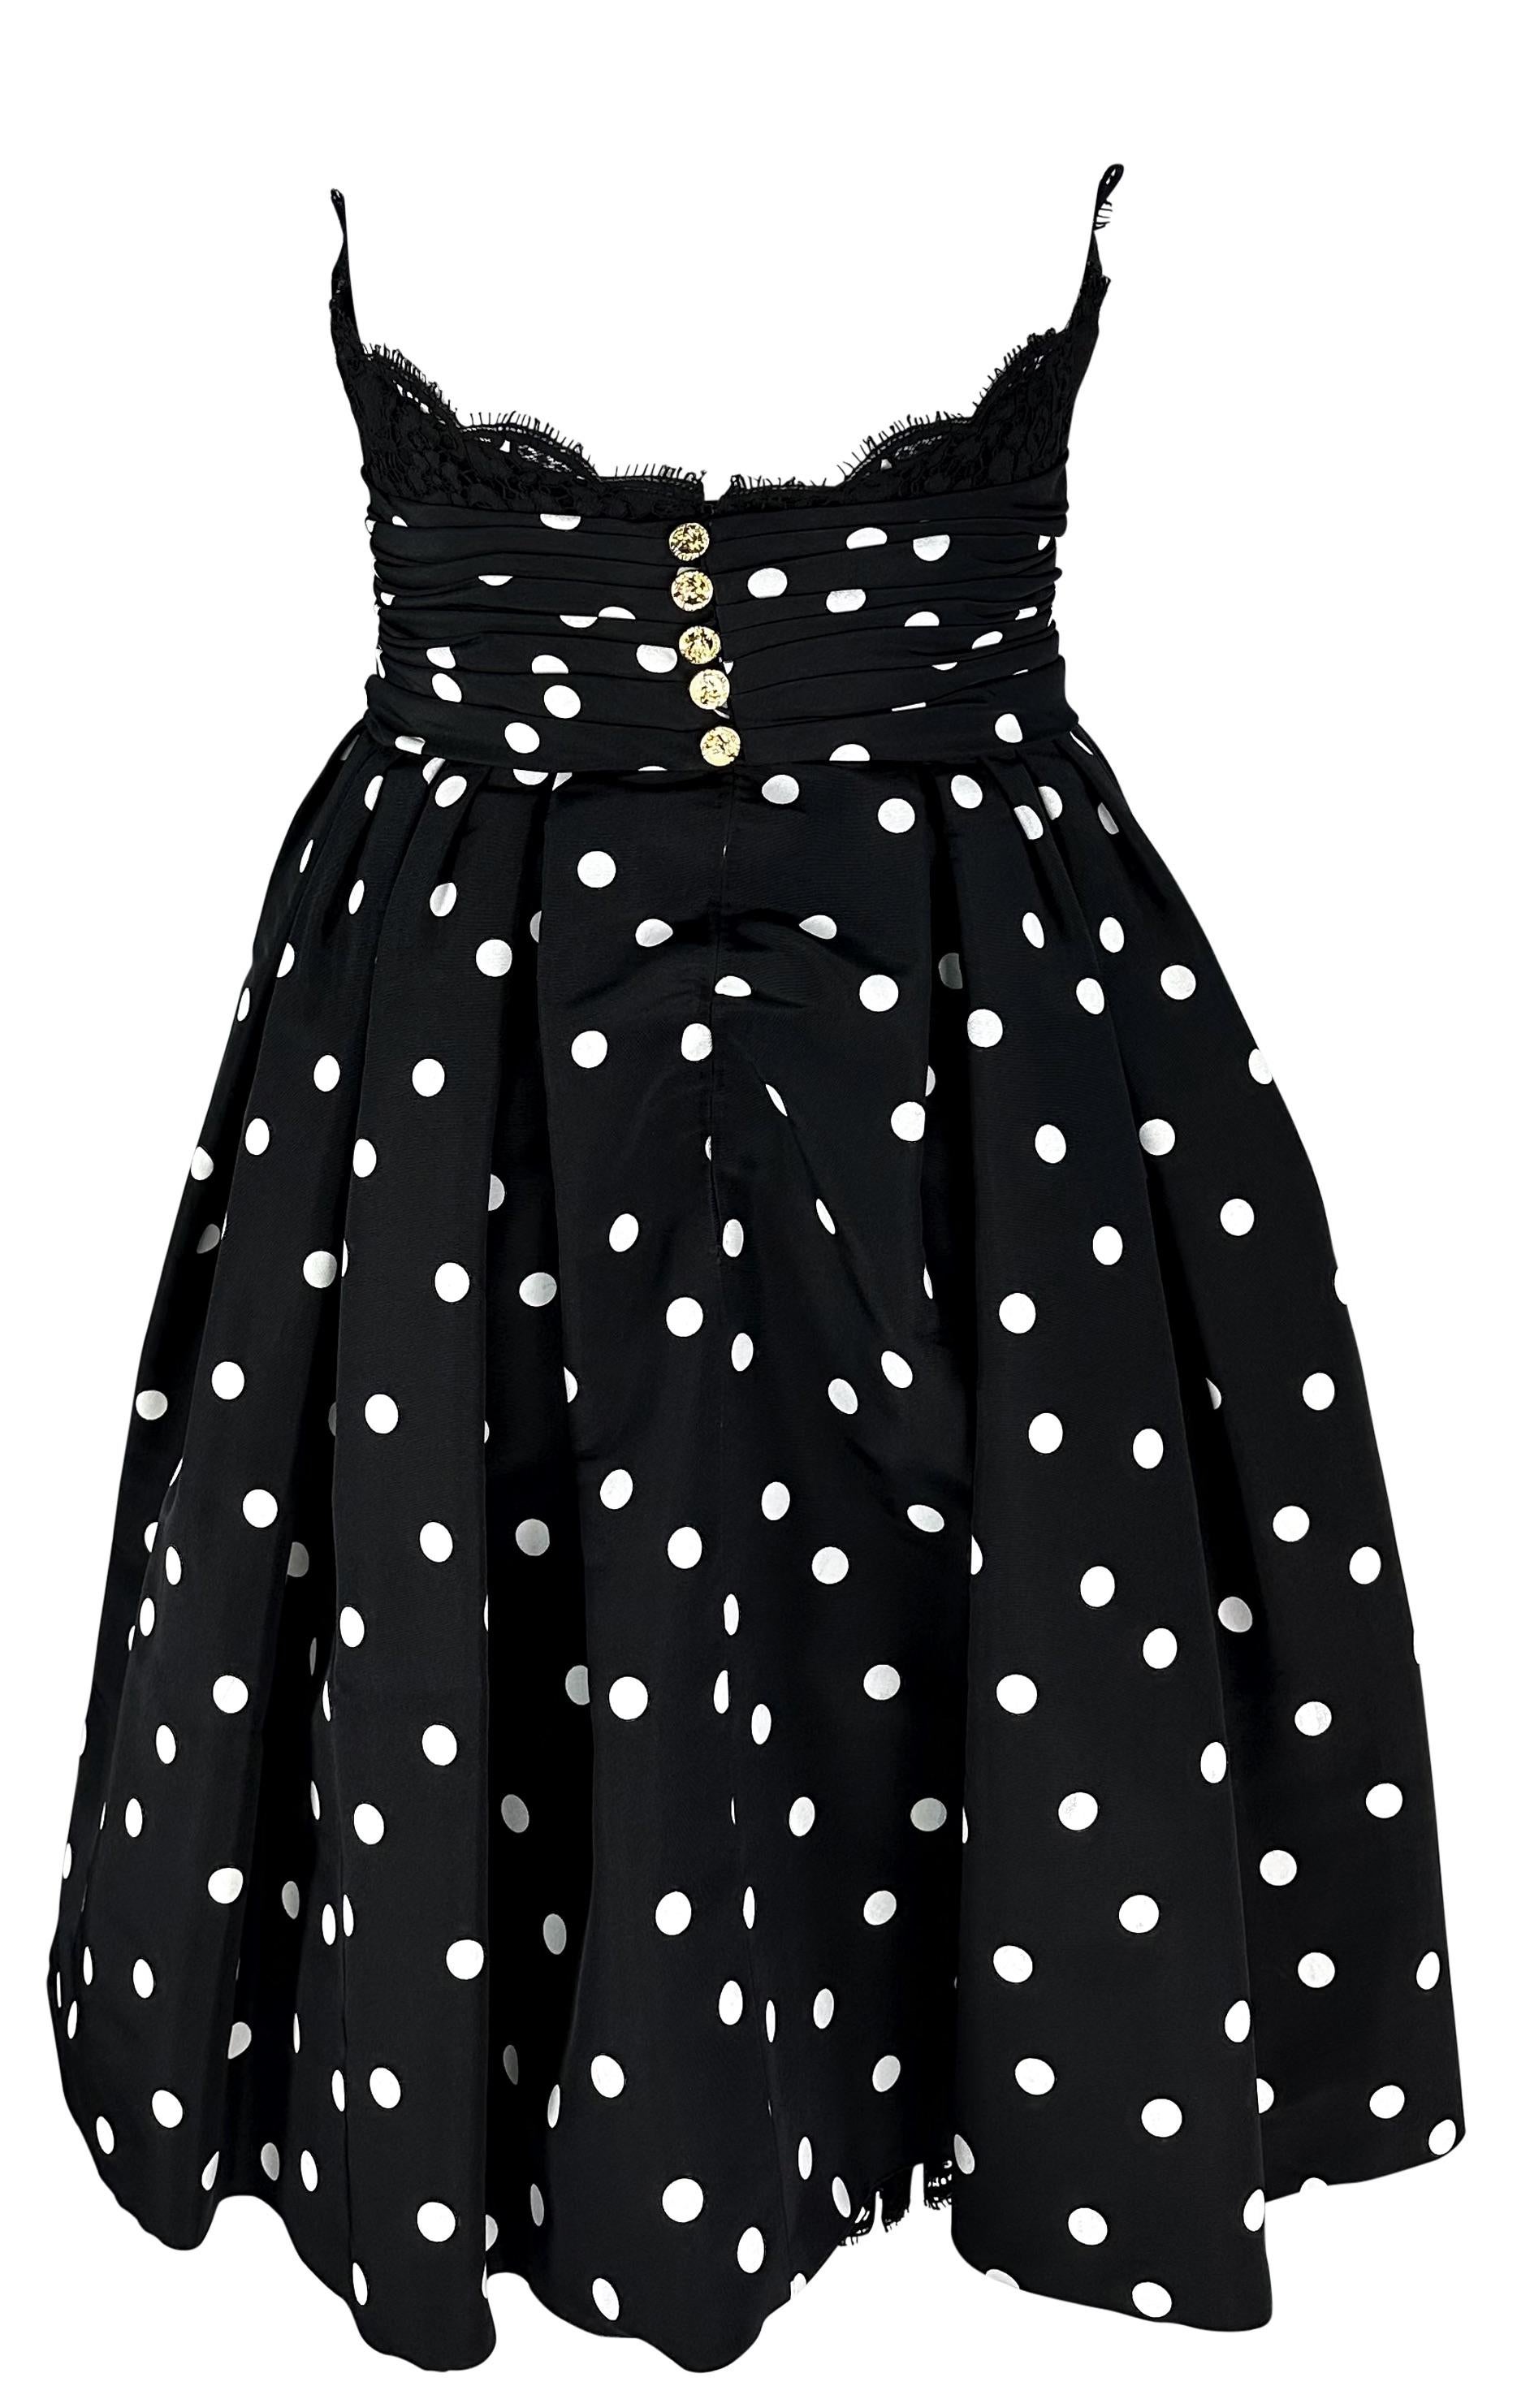  S/S 1988 Chanel by Karl Lagerfeld Runway Polka Dot Lace Strapless Flare Dress For Sale 1